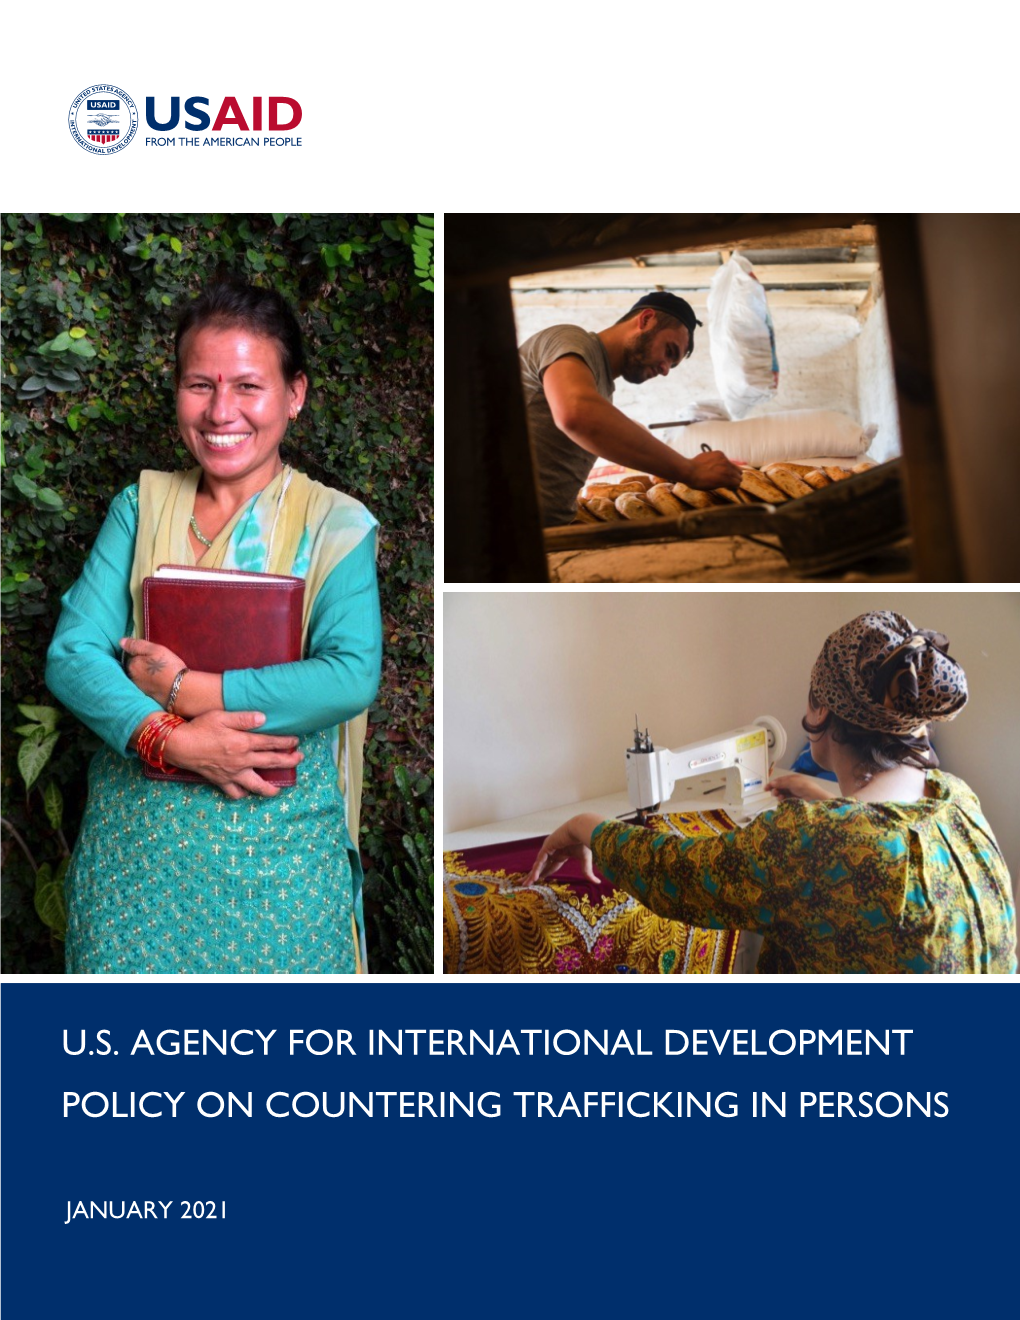 Counter Trafficking in Persons Policy